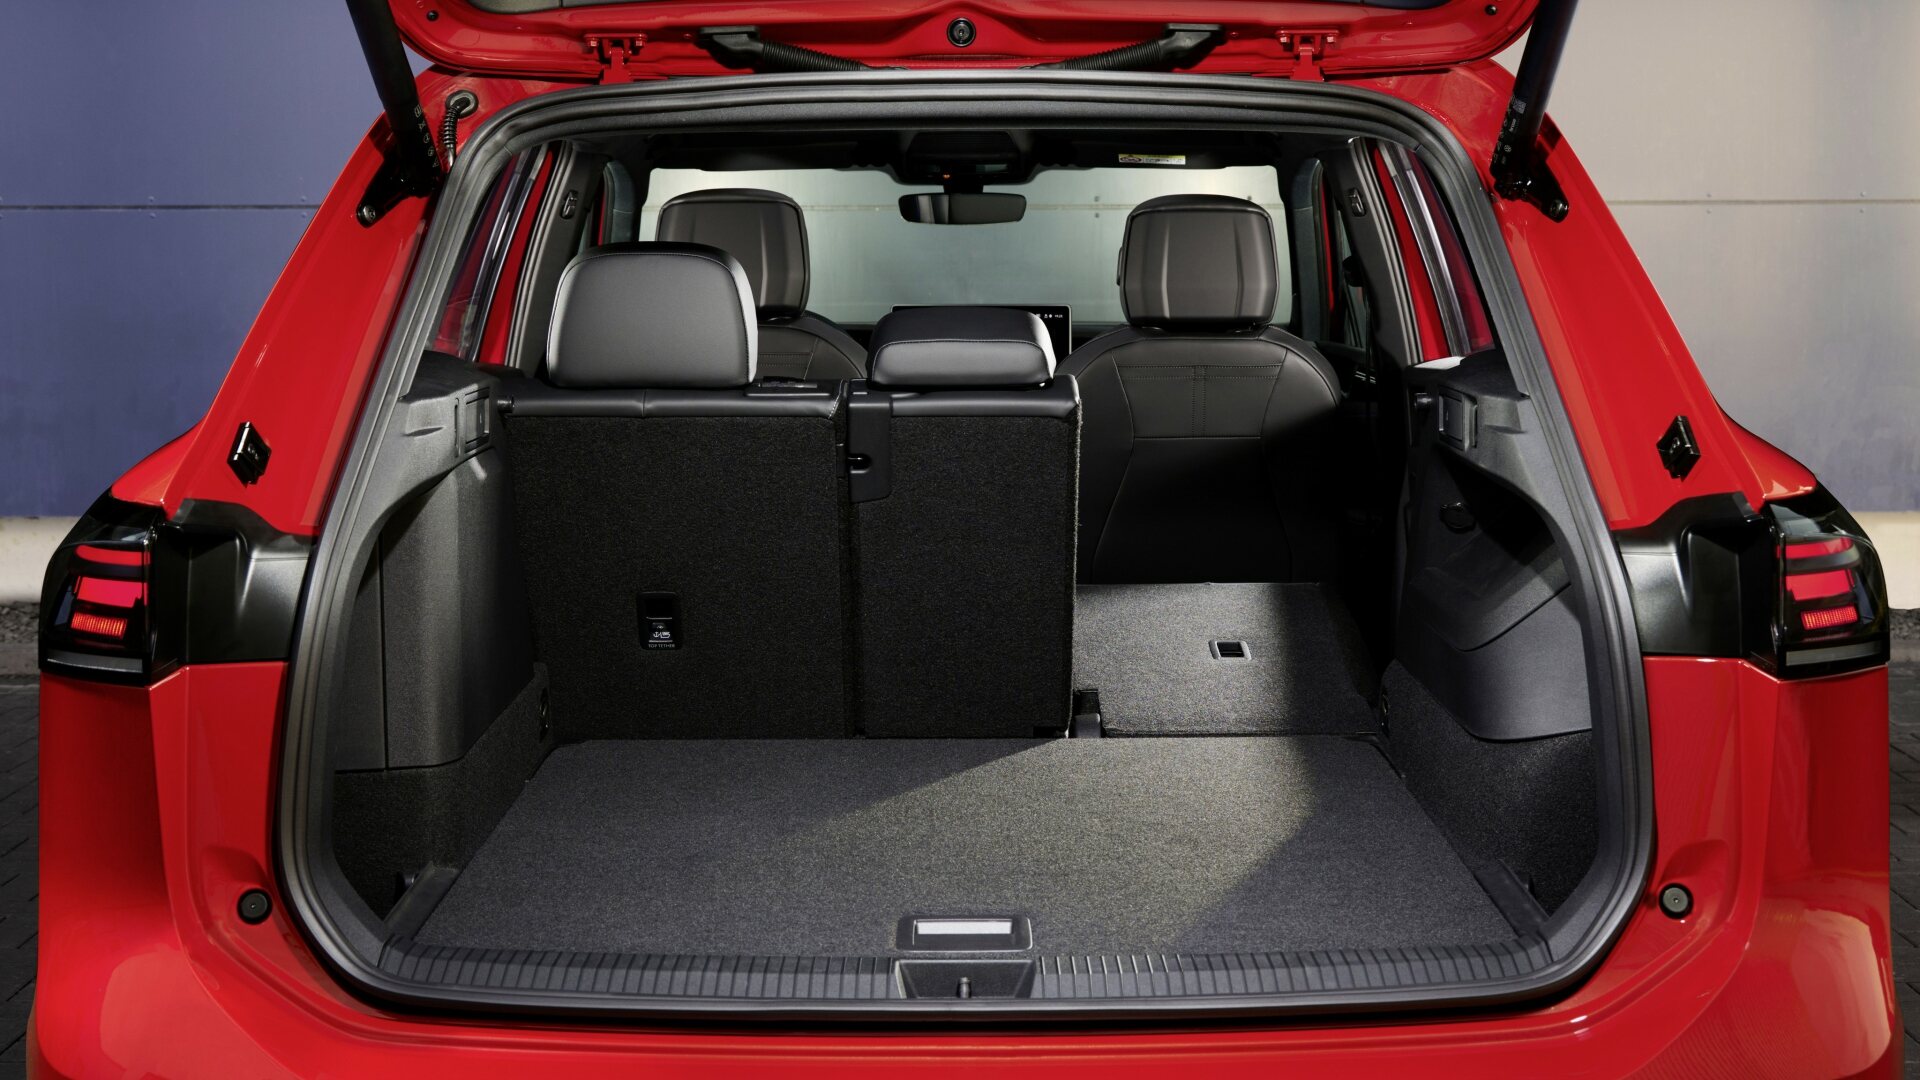 The Boot Space Available In The New 2025 Volkswagen Tiguan (Credits Volkswagen)